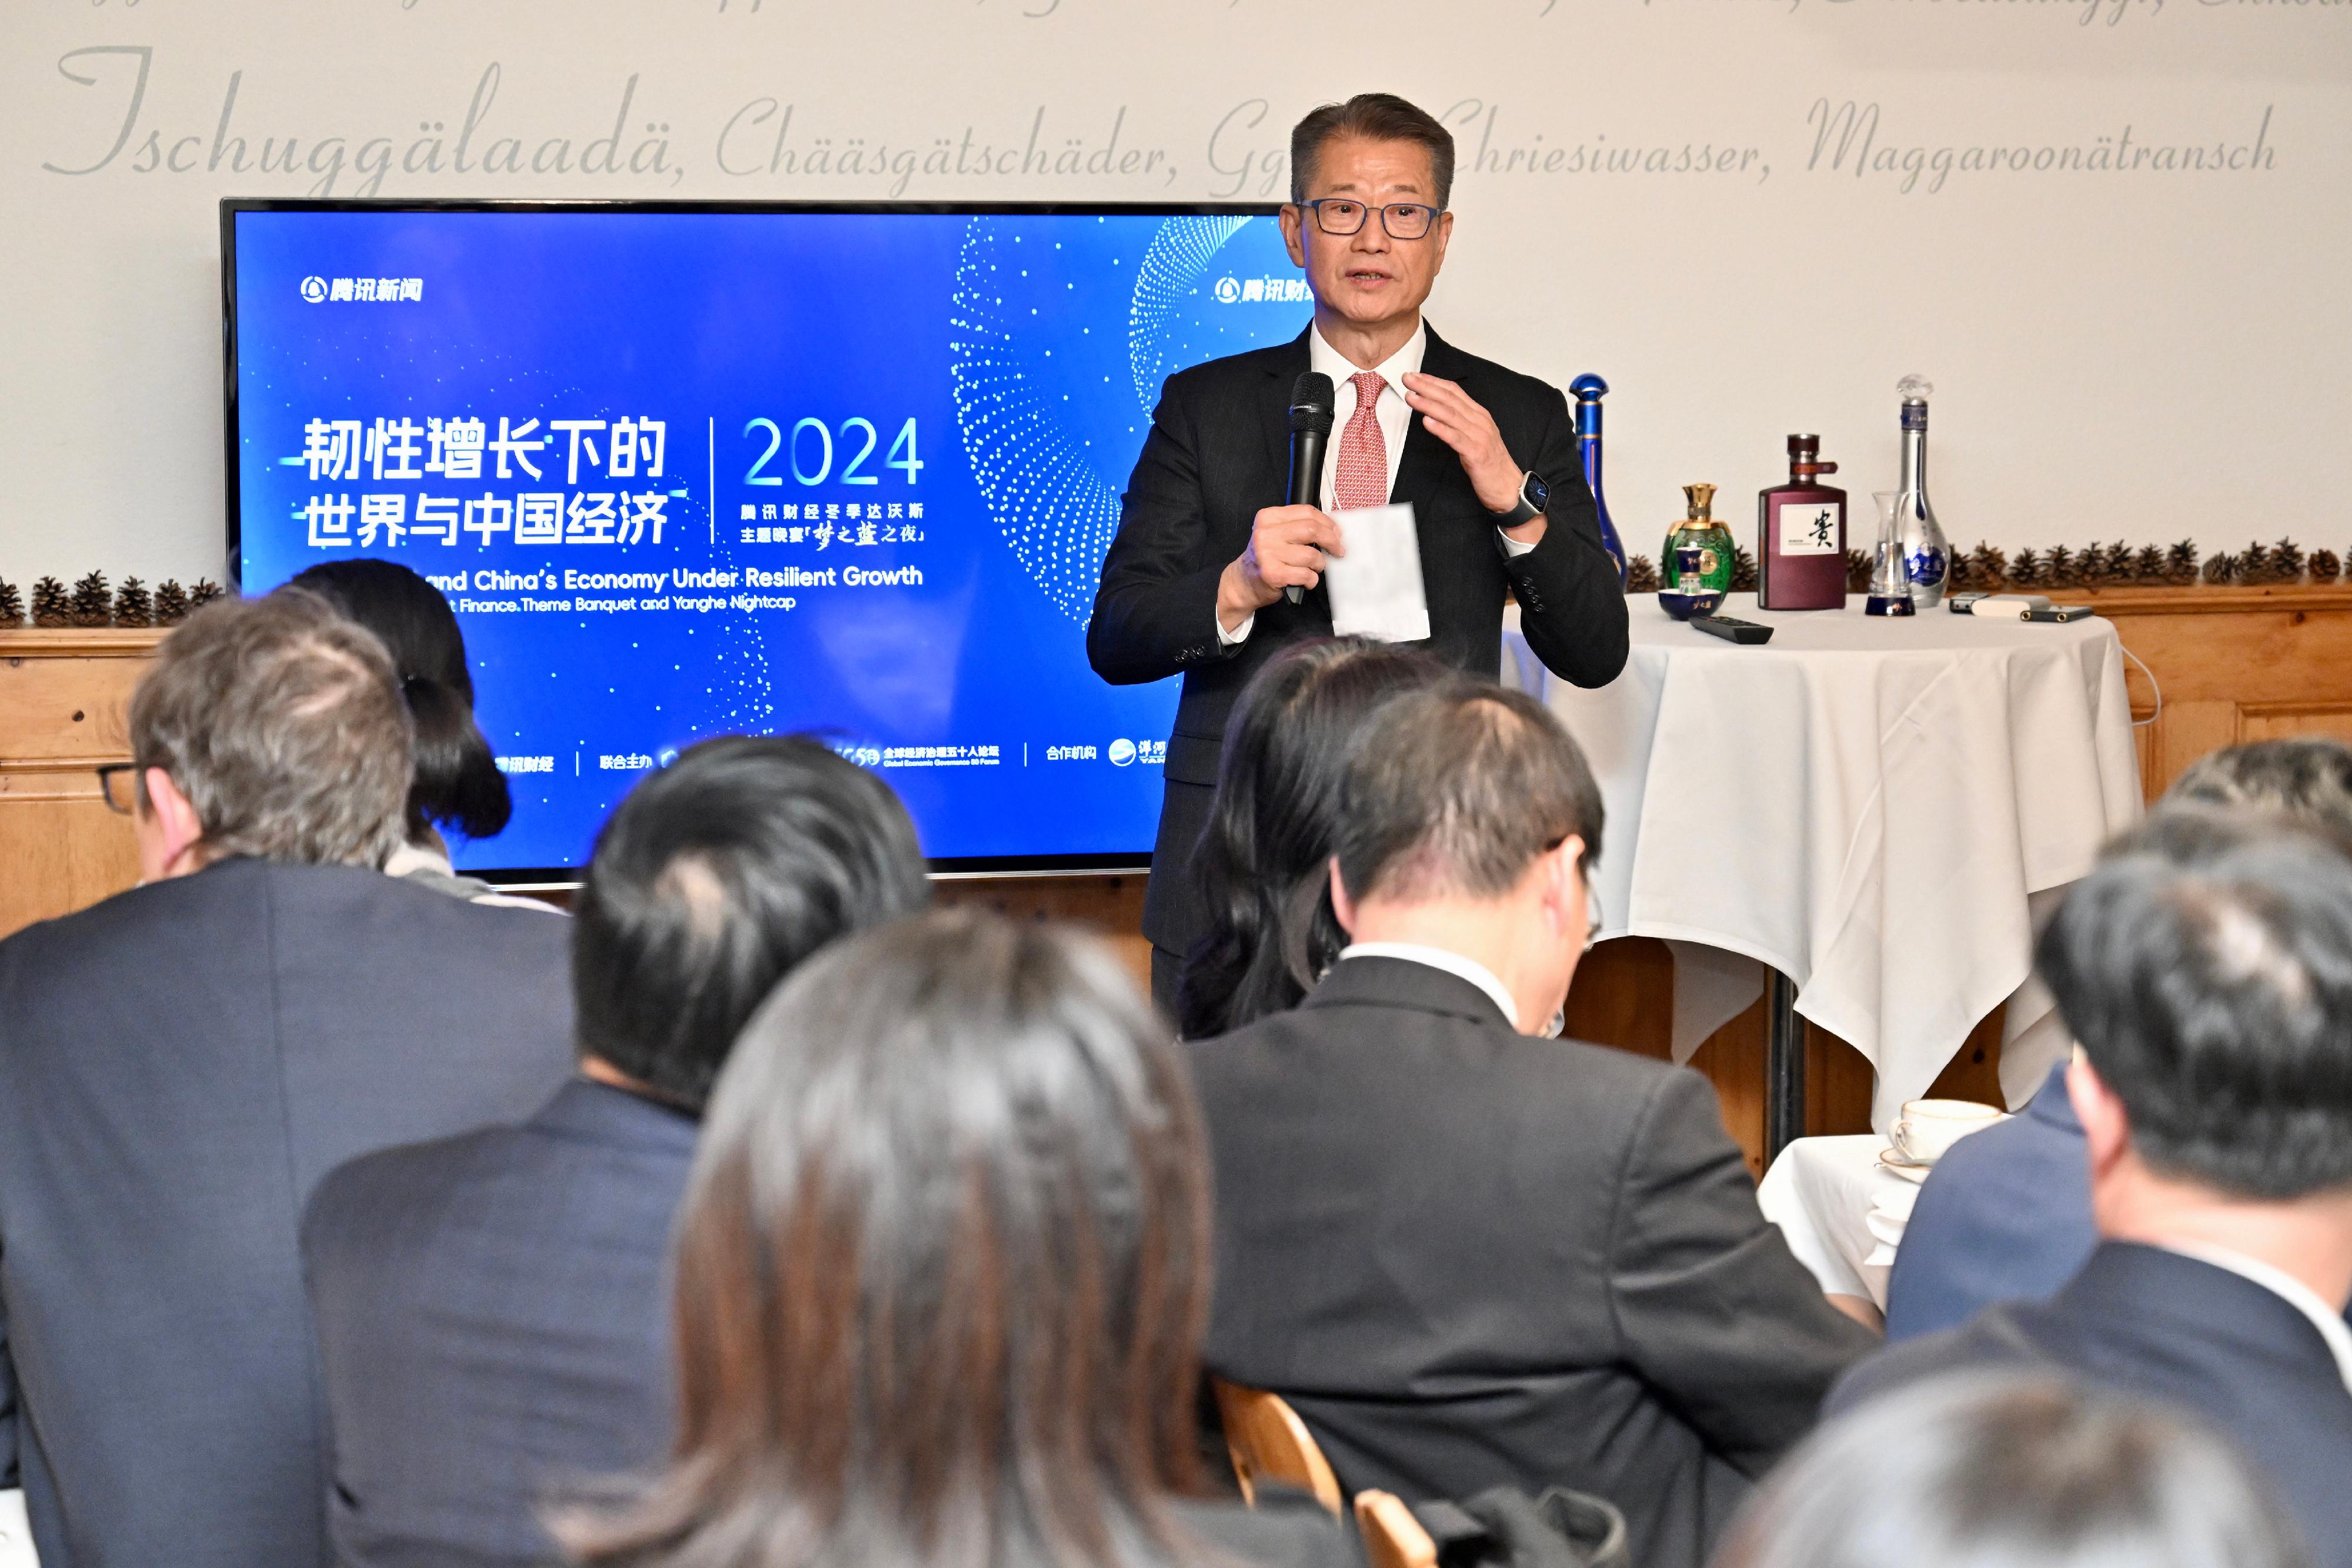 The Financial Secretary, Mr Paul Chan, continued his visit to Davos, Switzerland, yesterday (January 16, Davos time). Photo shows Mr Chan giving a speech at "The World and China's Economy Under Resilient Growth", a dinner hosted by Tencent.